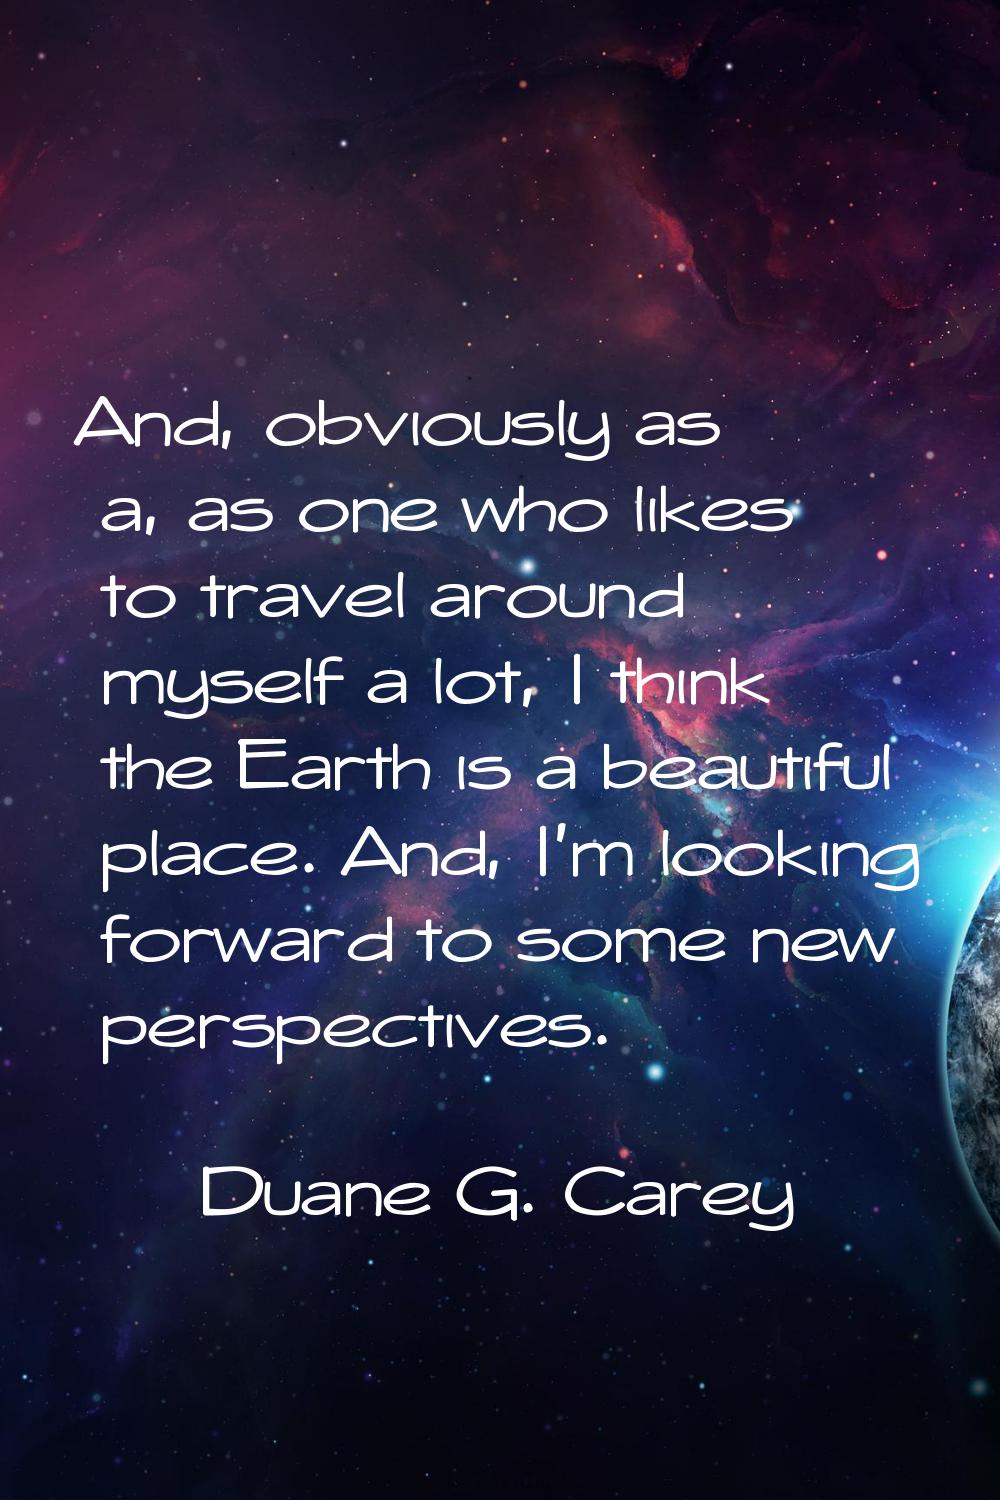 And, obviously as a, as one who likes to travel around myself a lot, I think the Earth is a beautif